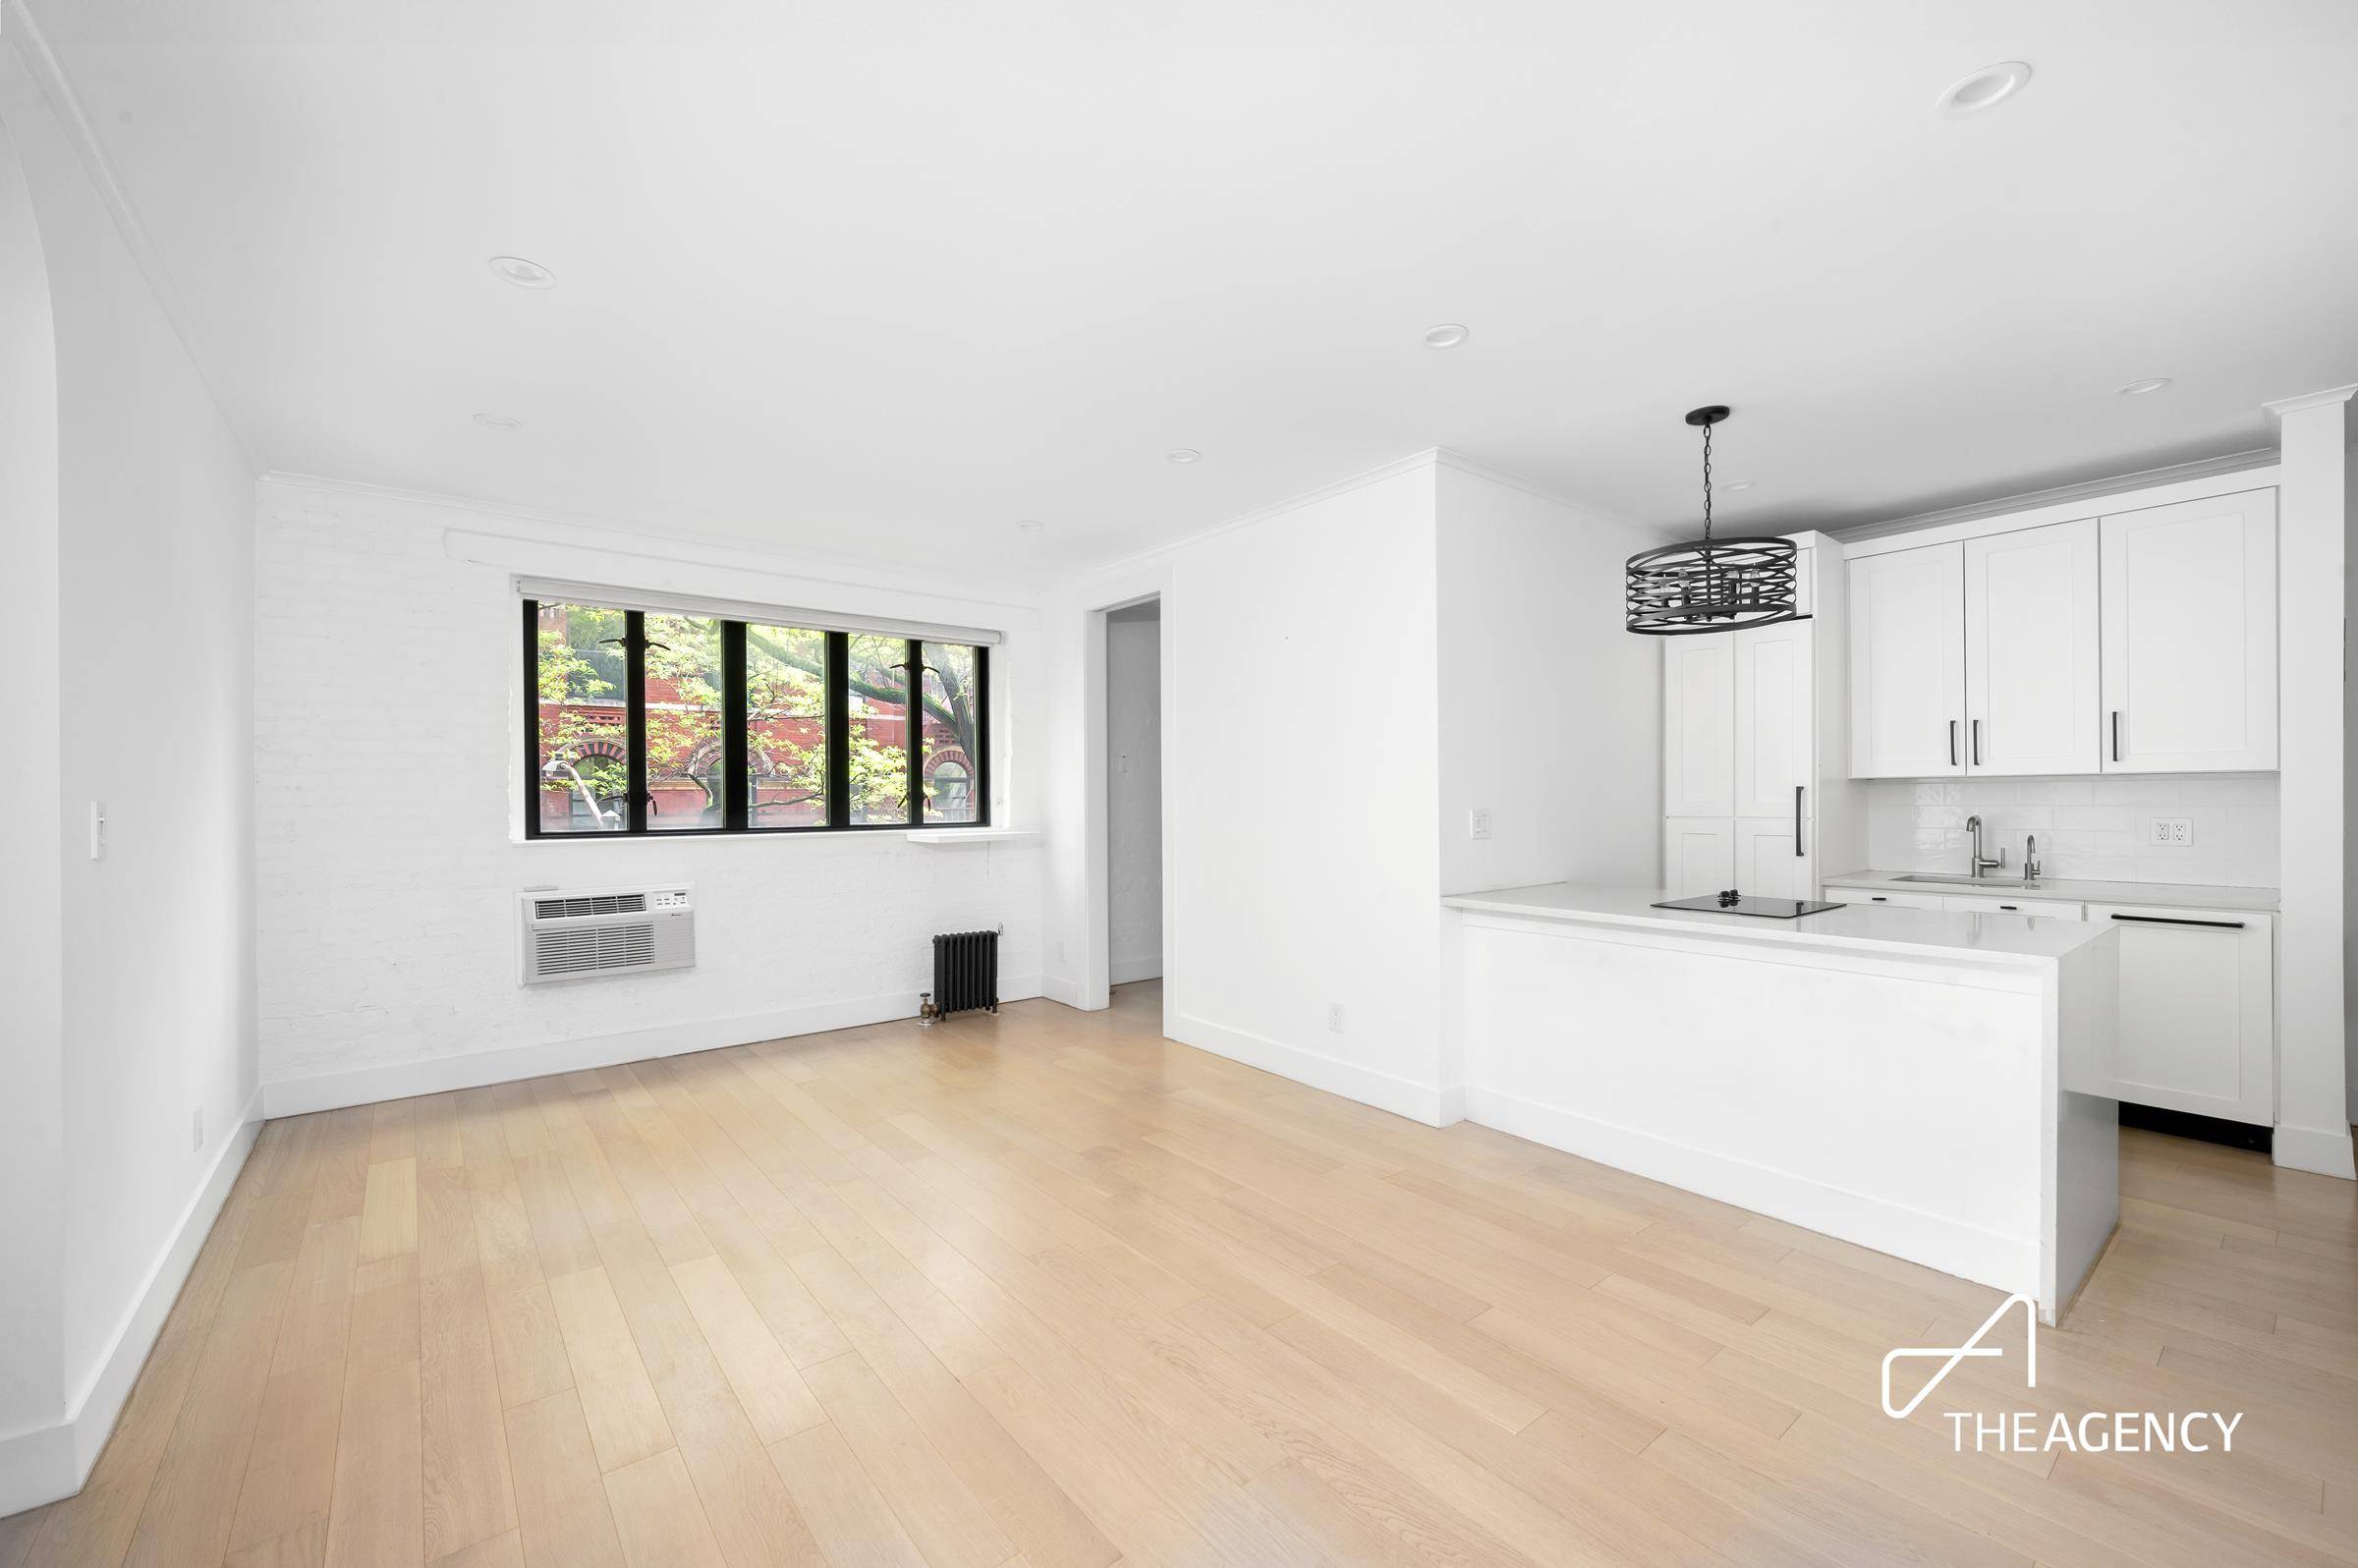 Location is everything and you can have it all at the nexus of Soho and the West Village !